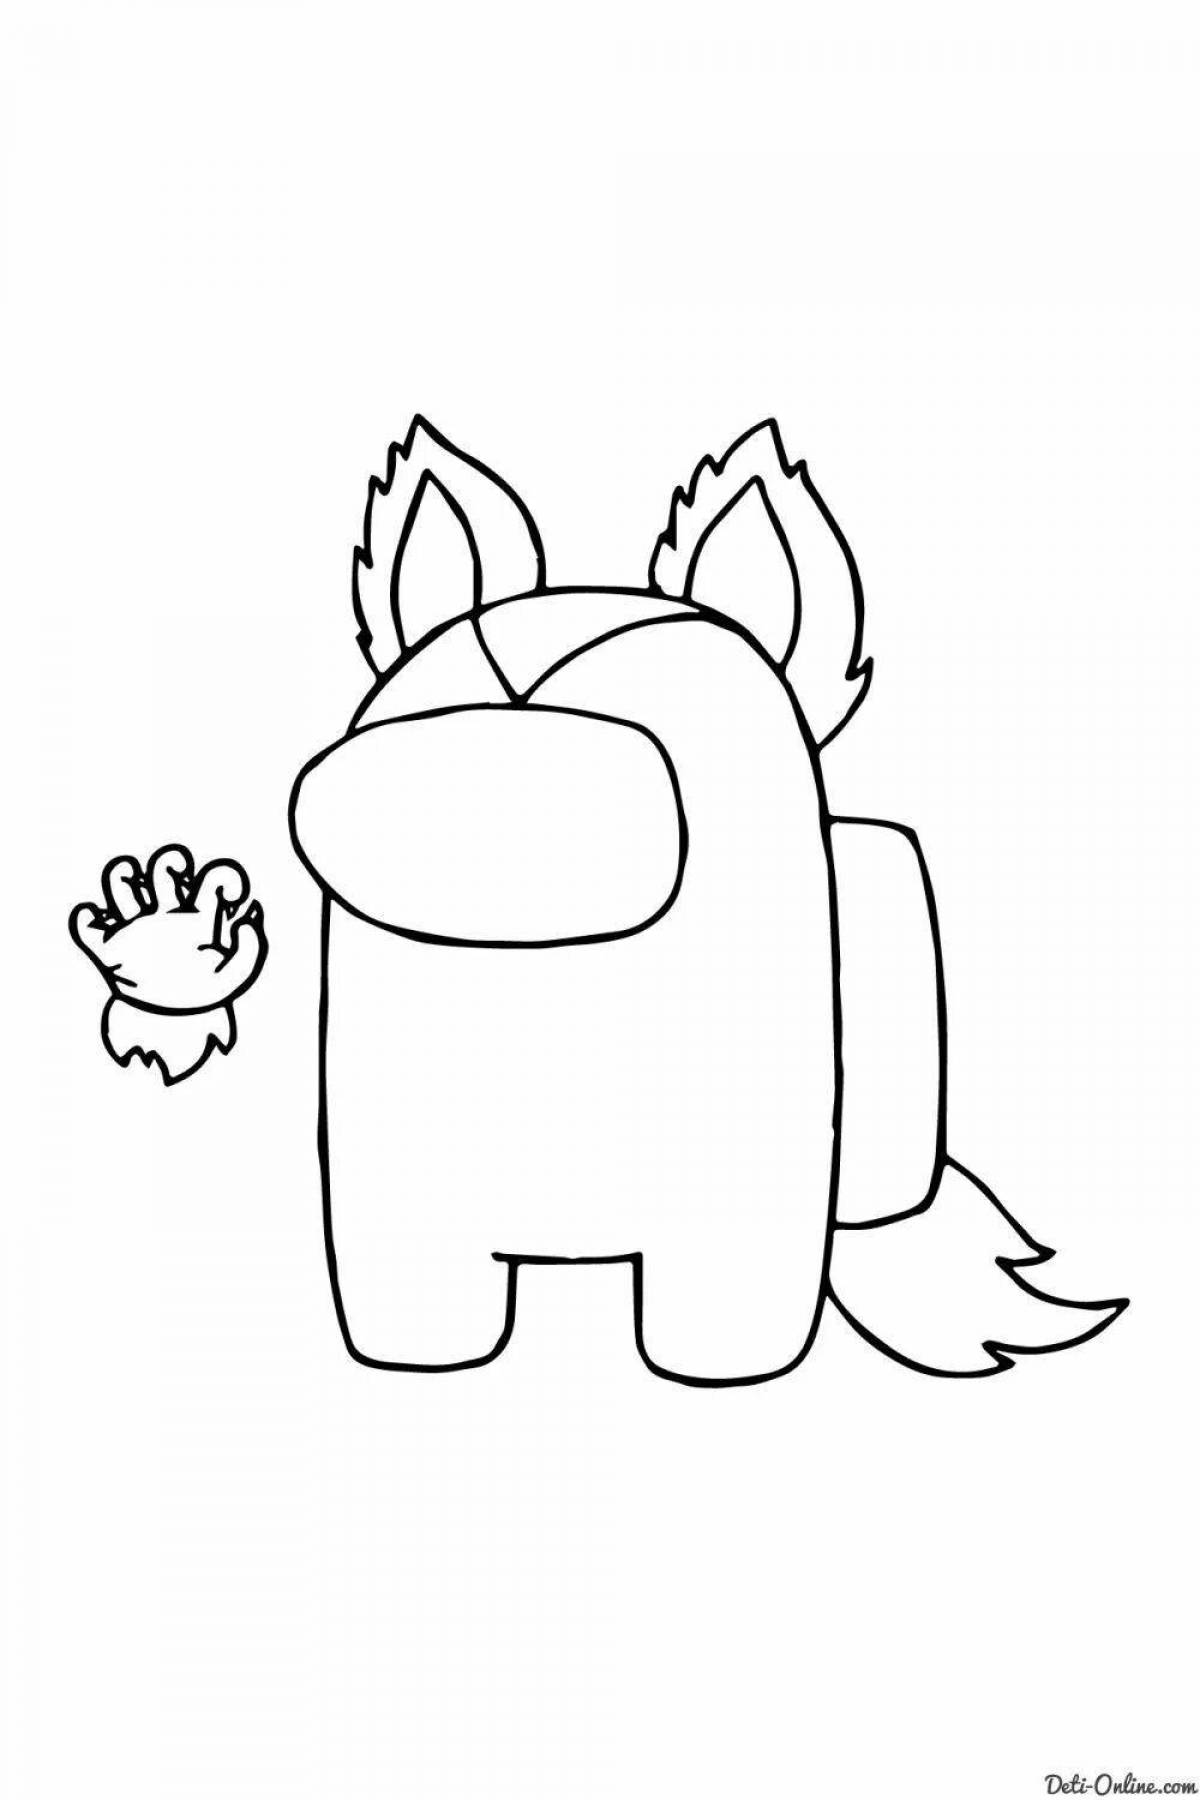 Ace cat live coloring page